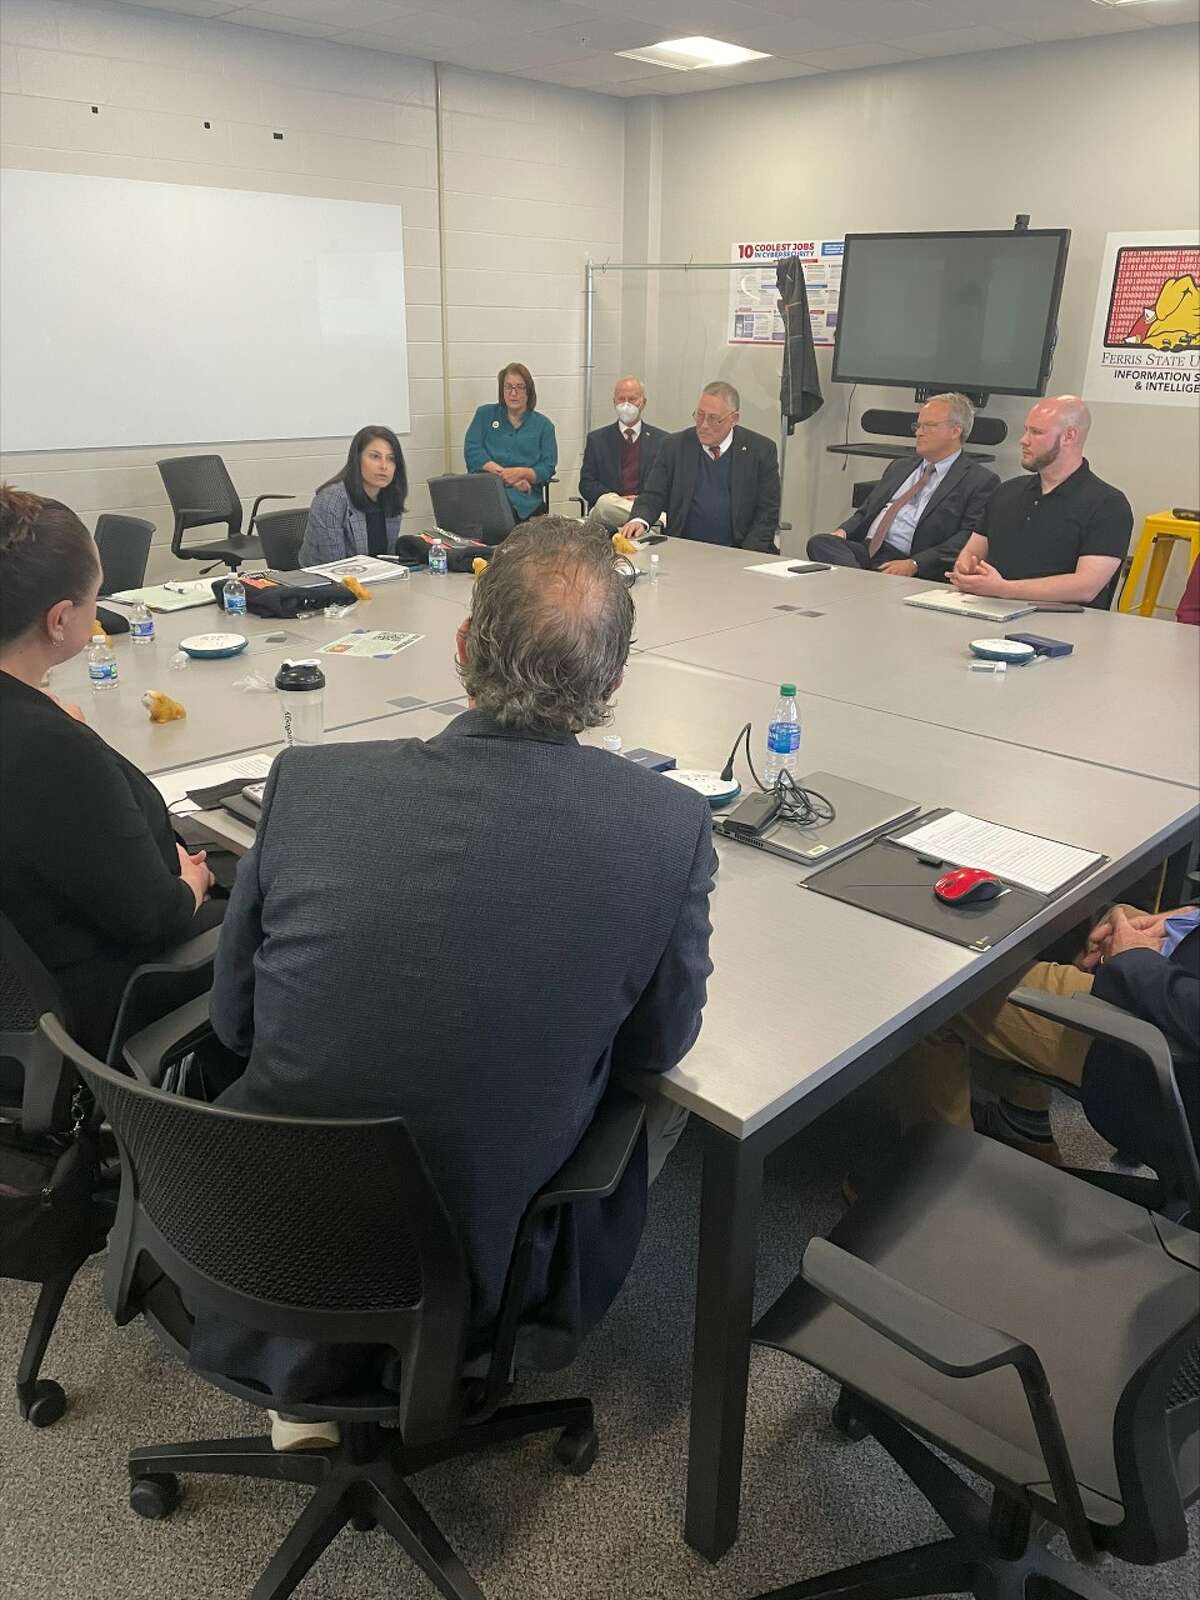 Michigan Attorney General Dana Nessel visited with professors and students at the Center for Cybersecurity and Data Sciences this week to discuss ways to combat cyber crimes.